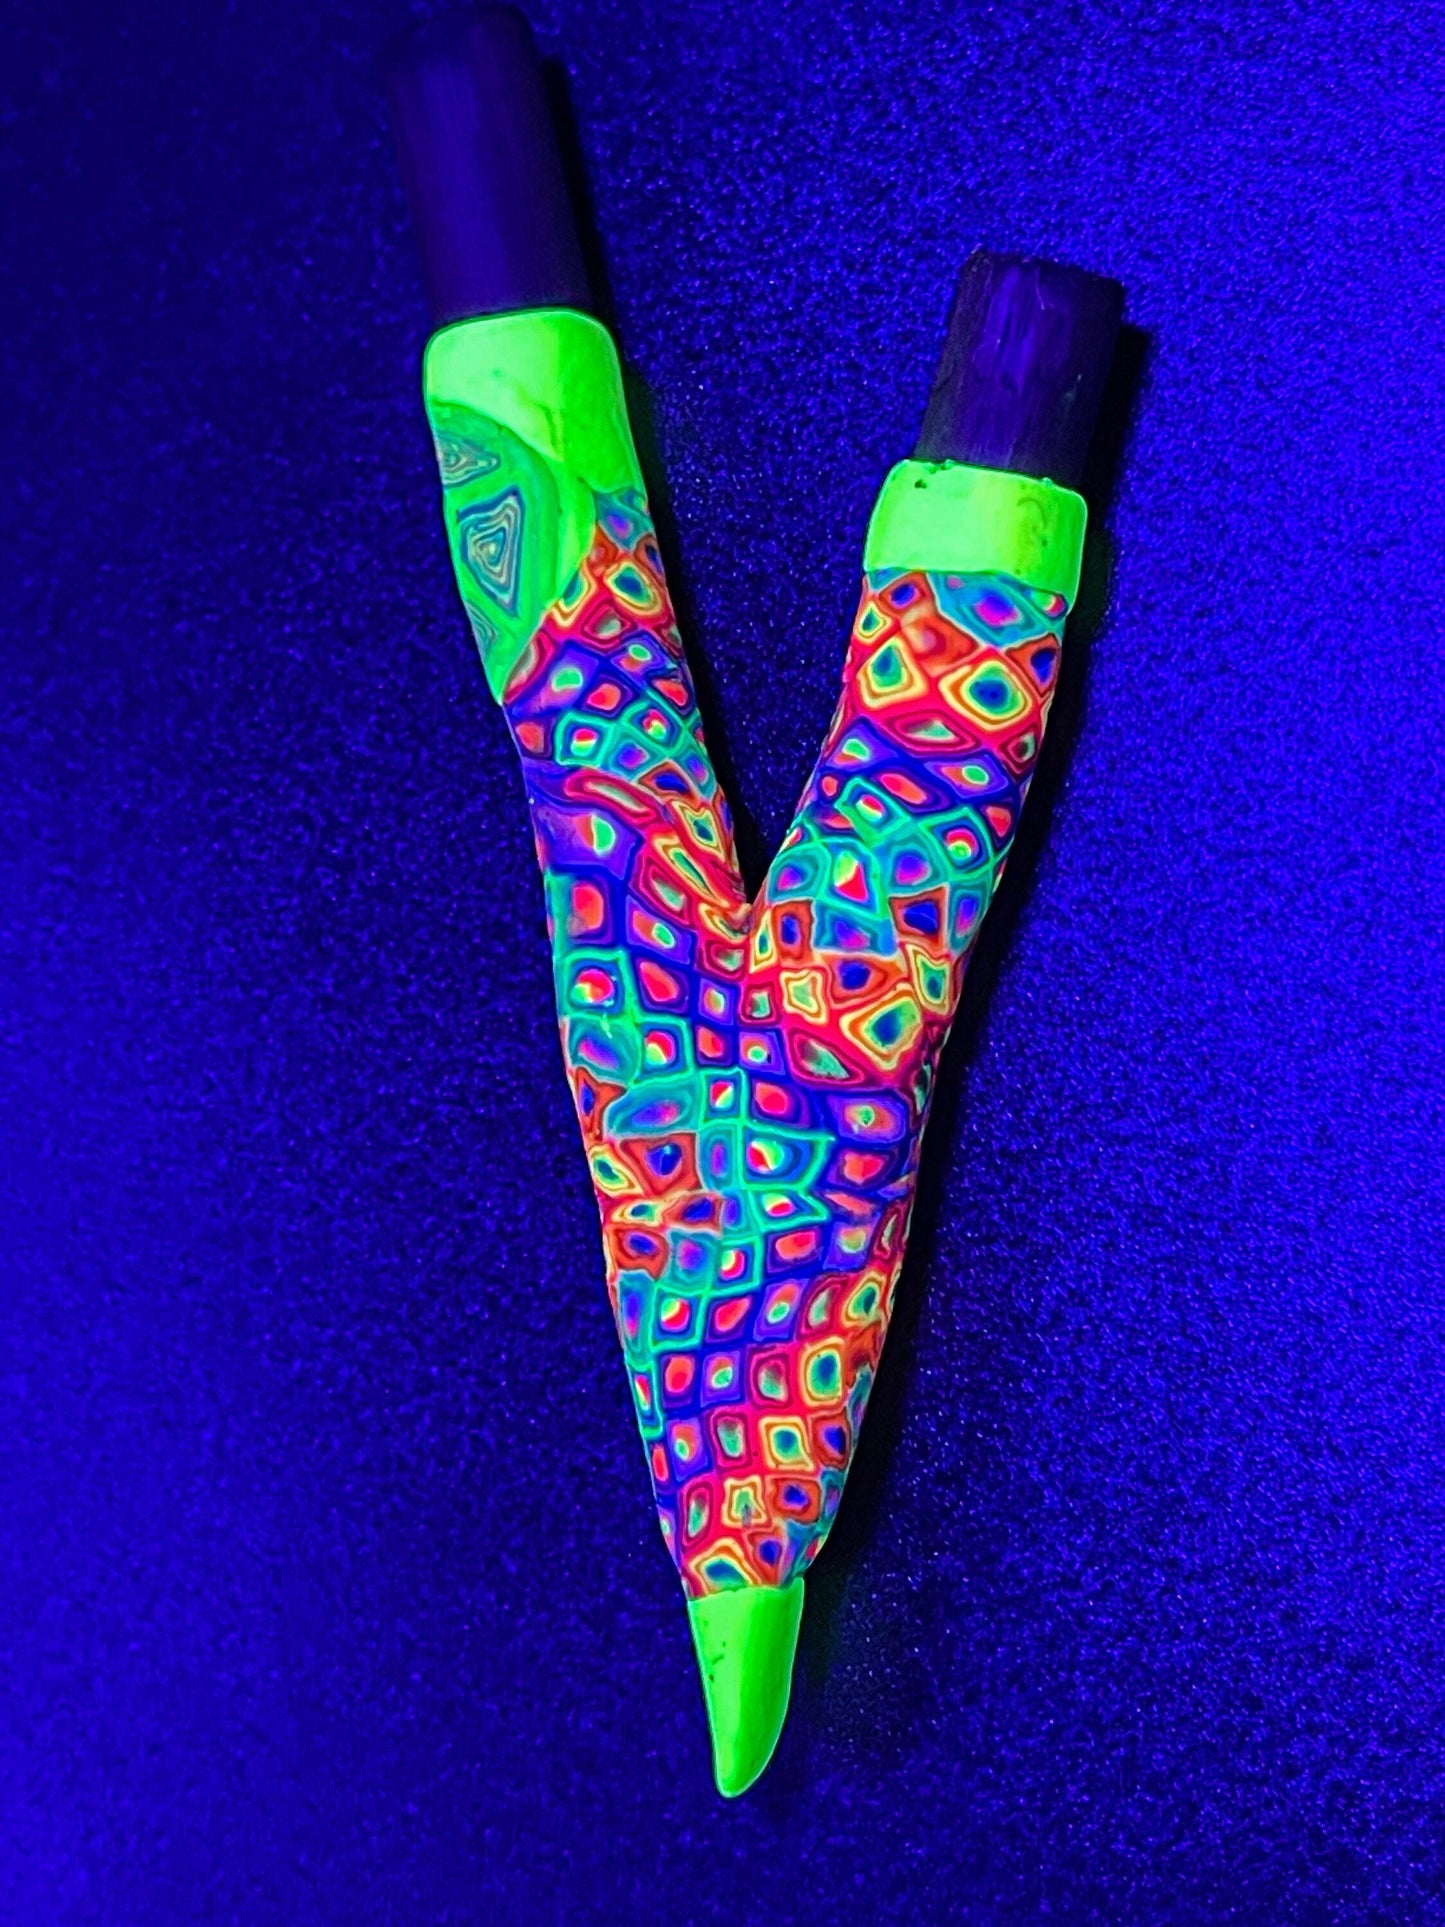 Kuripe self applicator - Traditionally ment for Rapè  - handmade polymer clay blacklight glowing art psychedelic UV eye candy made with love